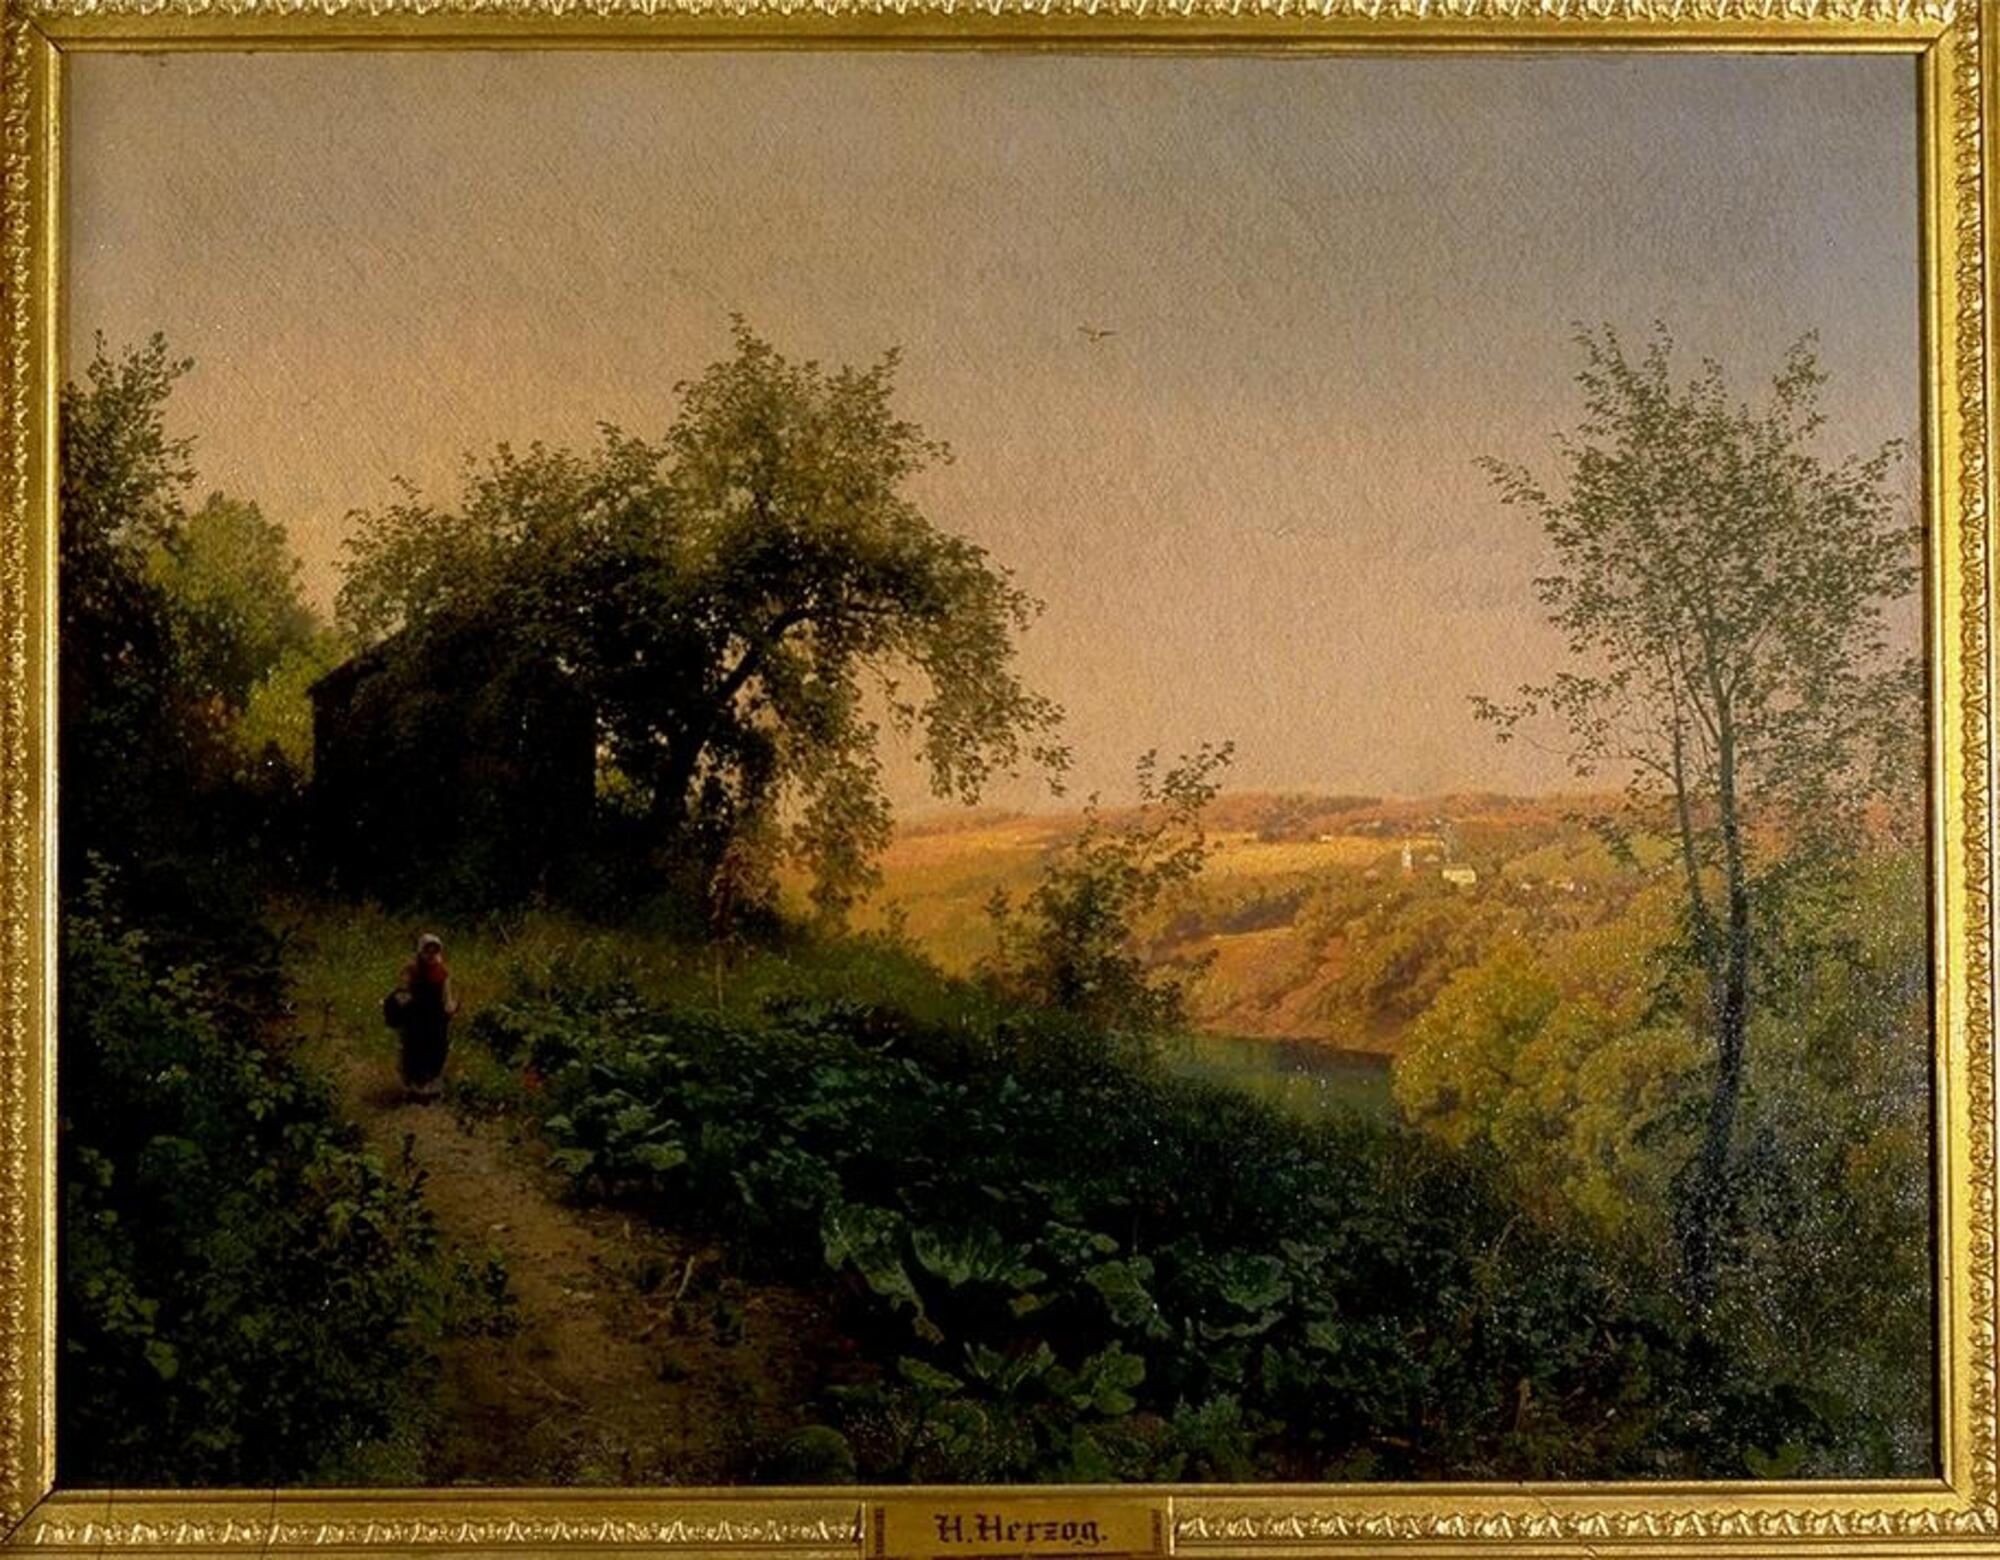 This painting depicts a lush green countryside with an expanse of blue sky. It shows a hillside overlooking a small lake. There is a vista of fields and hills that extends beyond the lake to the horizon.<br />
In the foreground, a woman wearing a long dress and a bonnet and carrying a walking stick and basket, walks toward the viewer along a dirt path. The path runs from a building on the far left toward the bottom of the painting. The vegetation is painted in sharp detail in dark tones of green and brown.<br />
In the right half of the composition, there is a scene of a distant village and farms viewed through the trees on the edge of the hillside. In contrast to the shadowy wooded area, the view is bathed in bright sunlight. There is a lone bird in flight in the light blue sky that fills the top half of the painting.